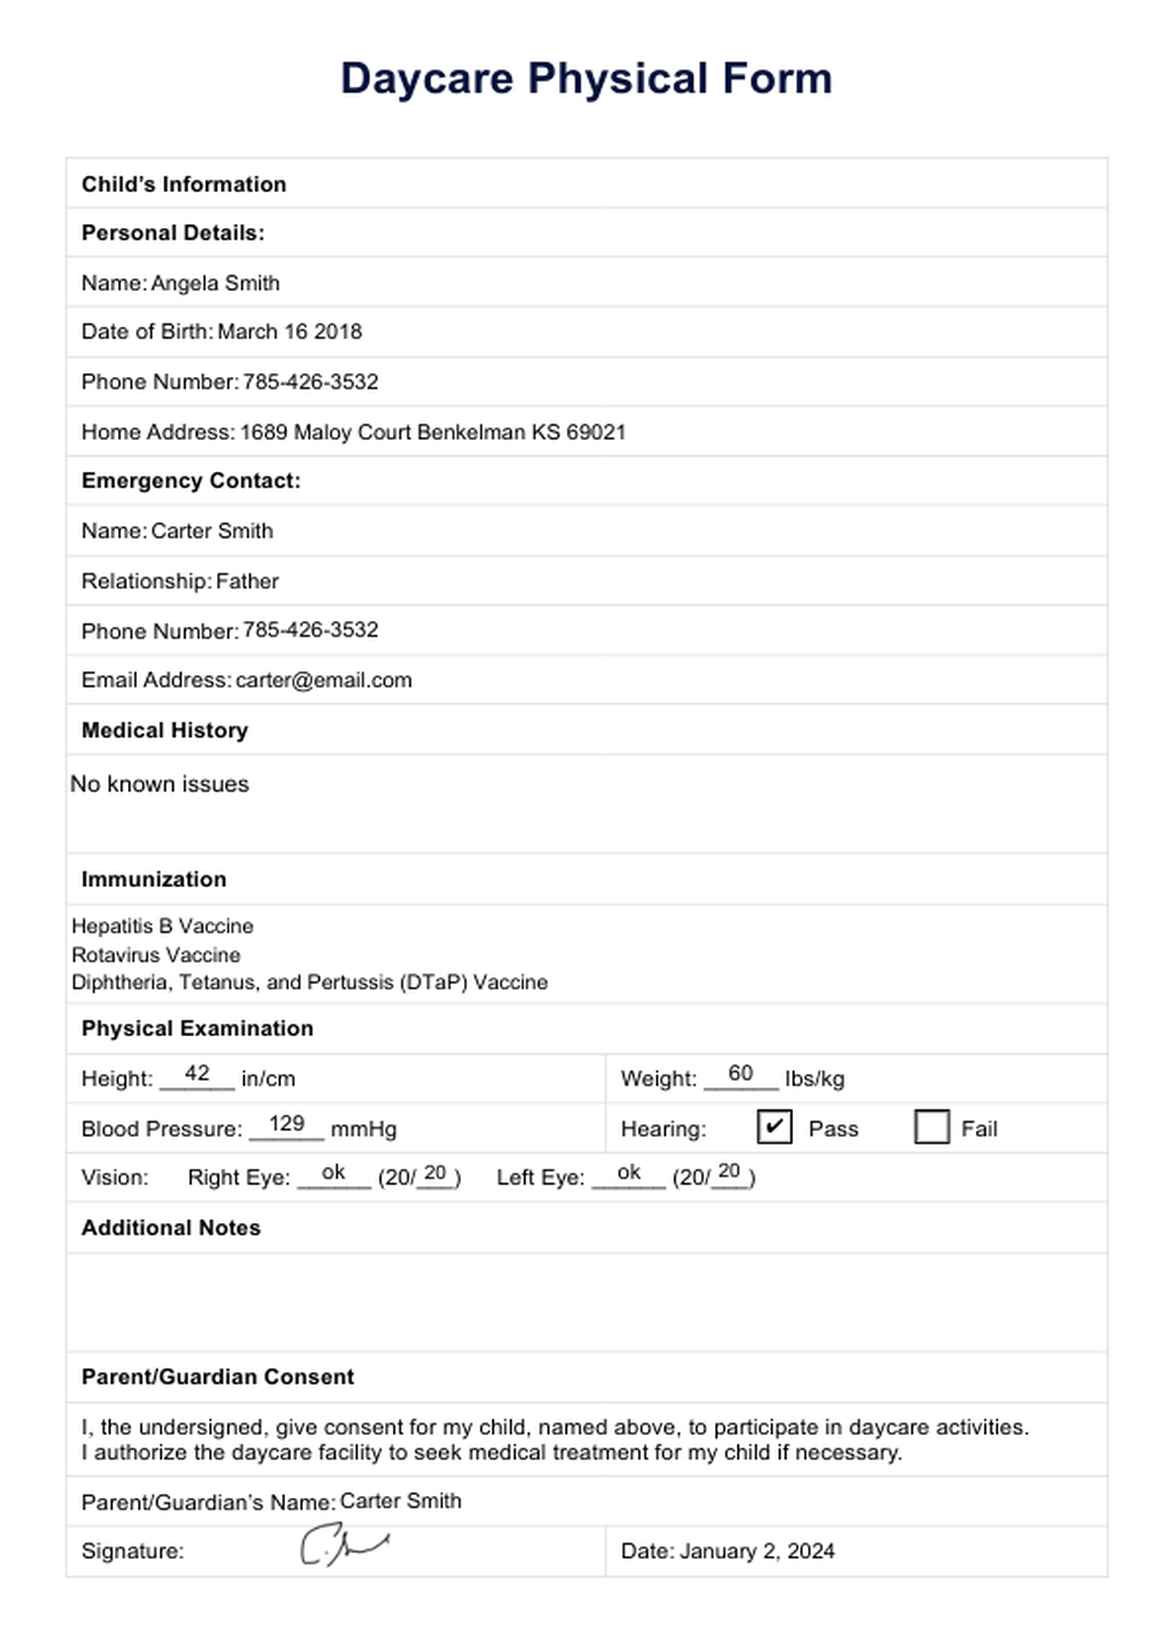 Daycare Physical Form PDF Example